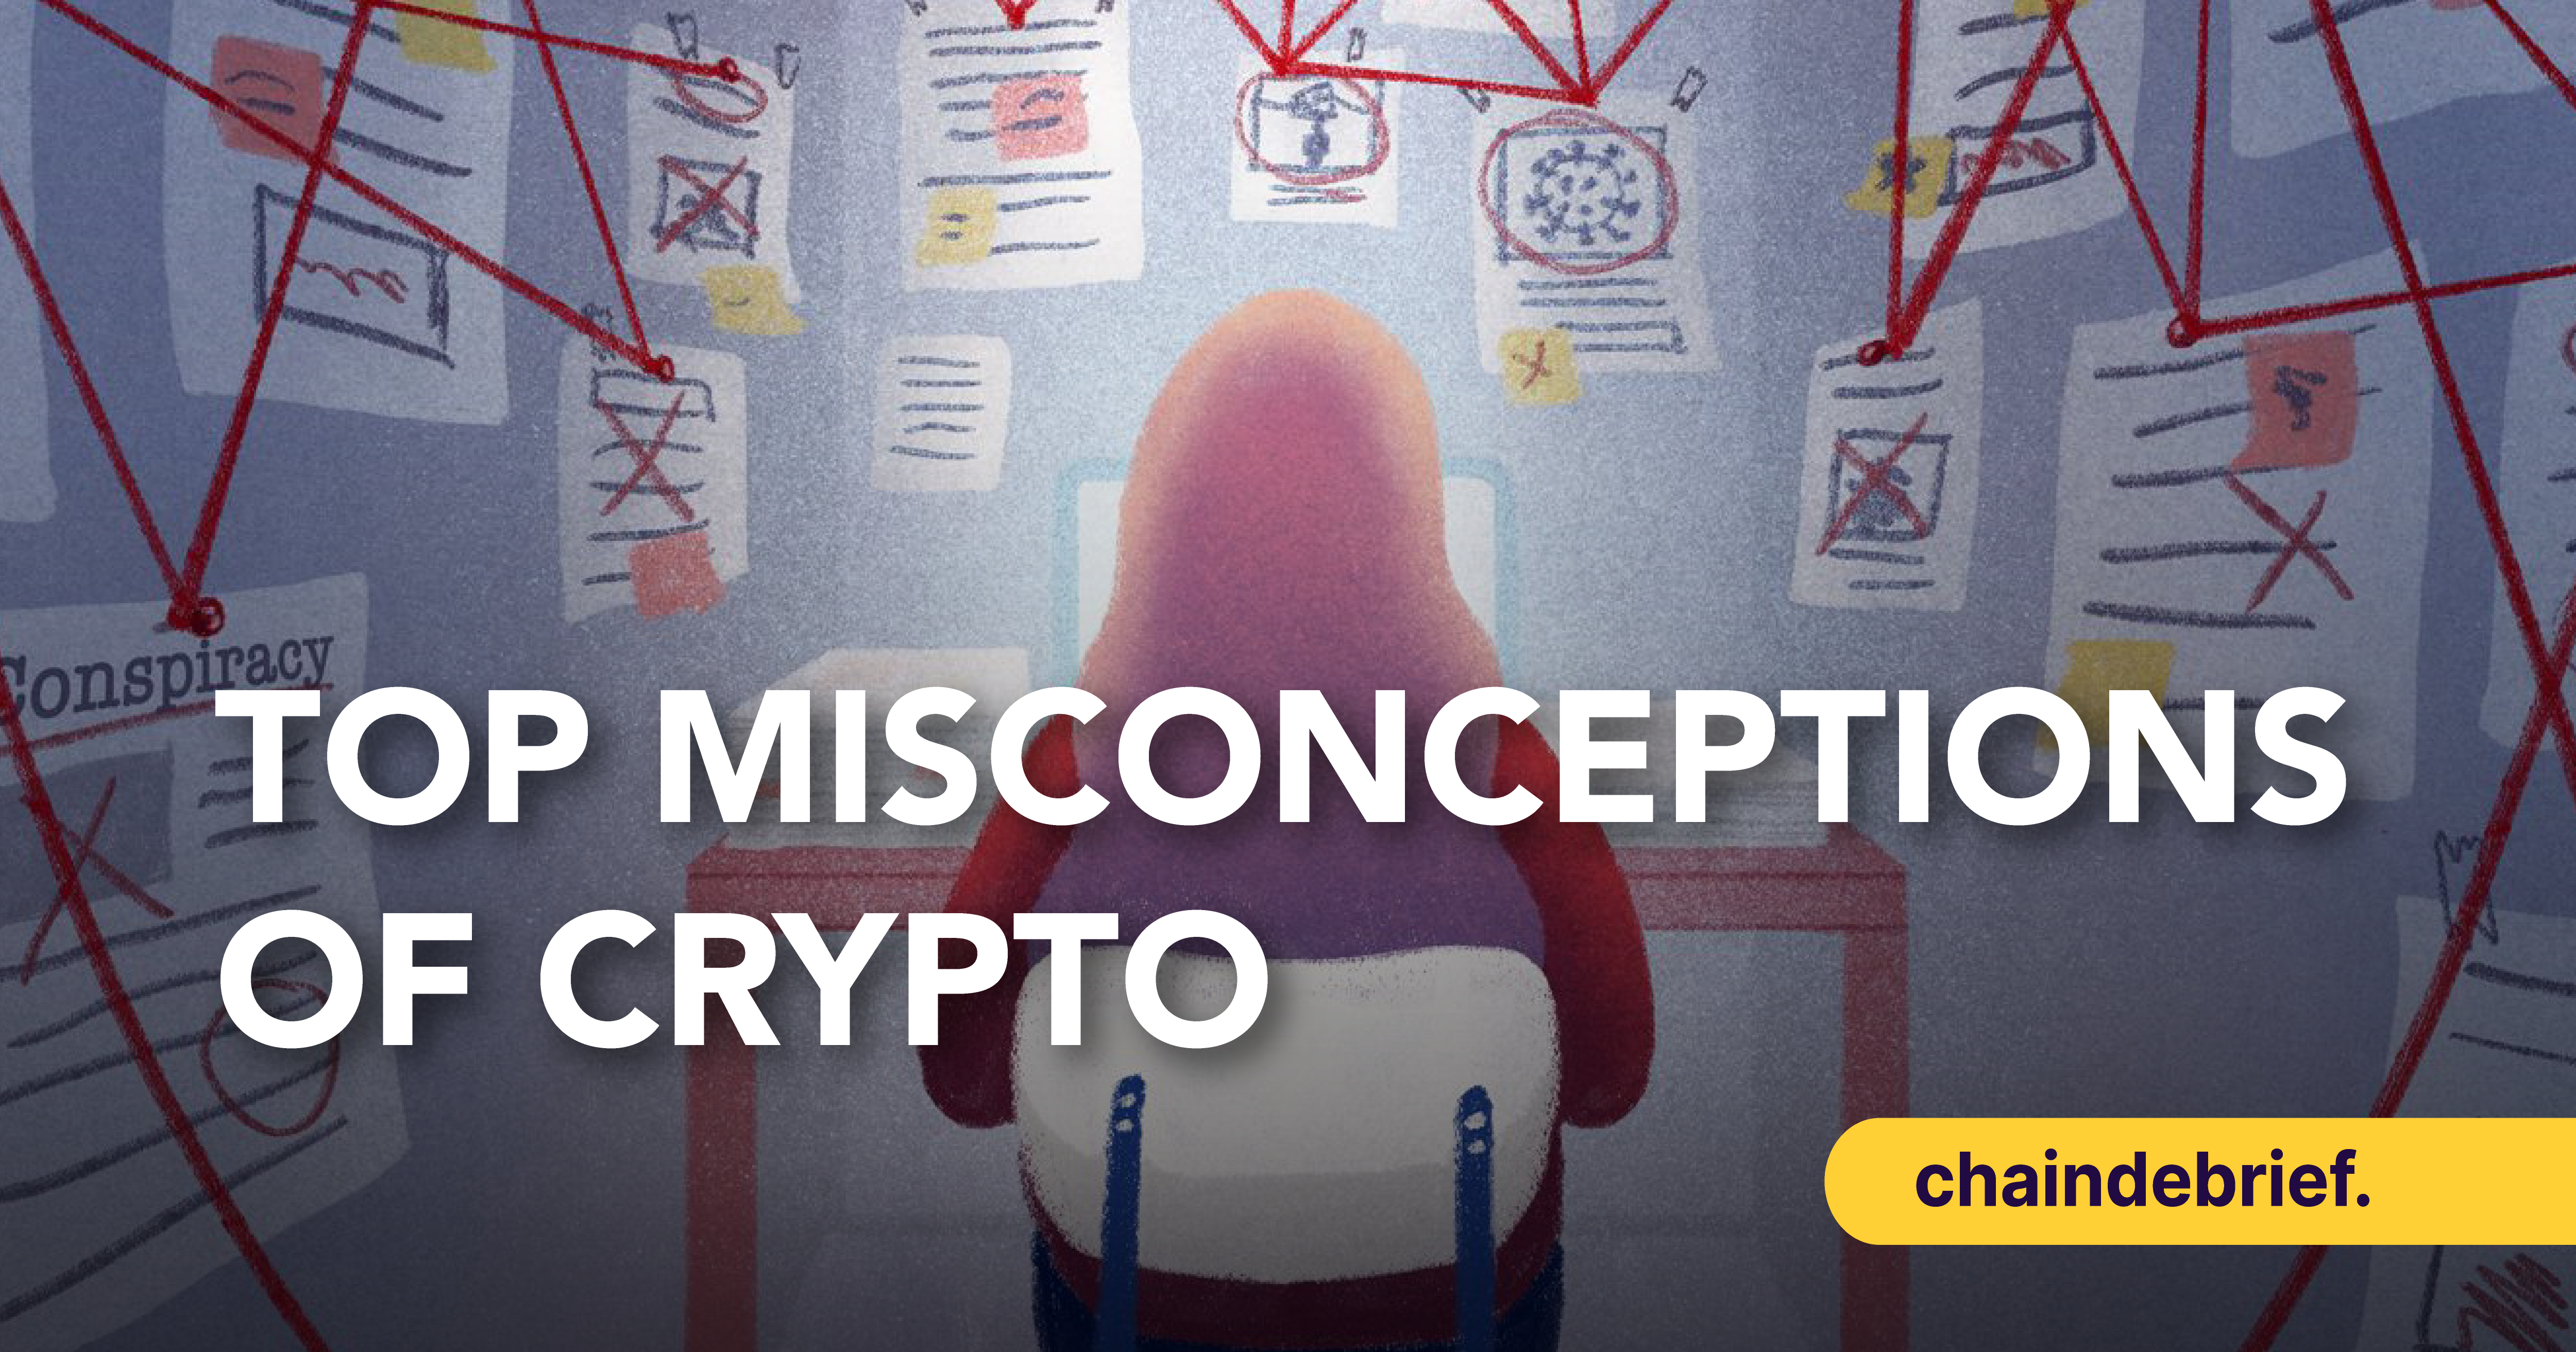 Is Crypto A Scam? Here Are The Top 5 Misconceptions About Crypto